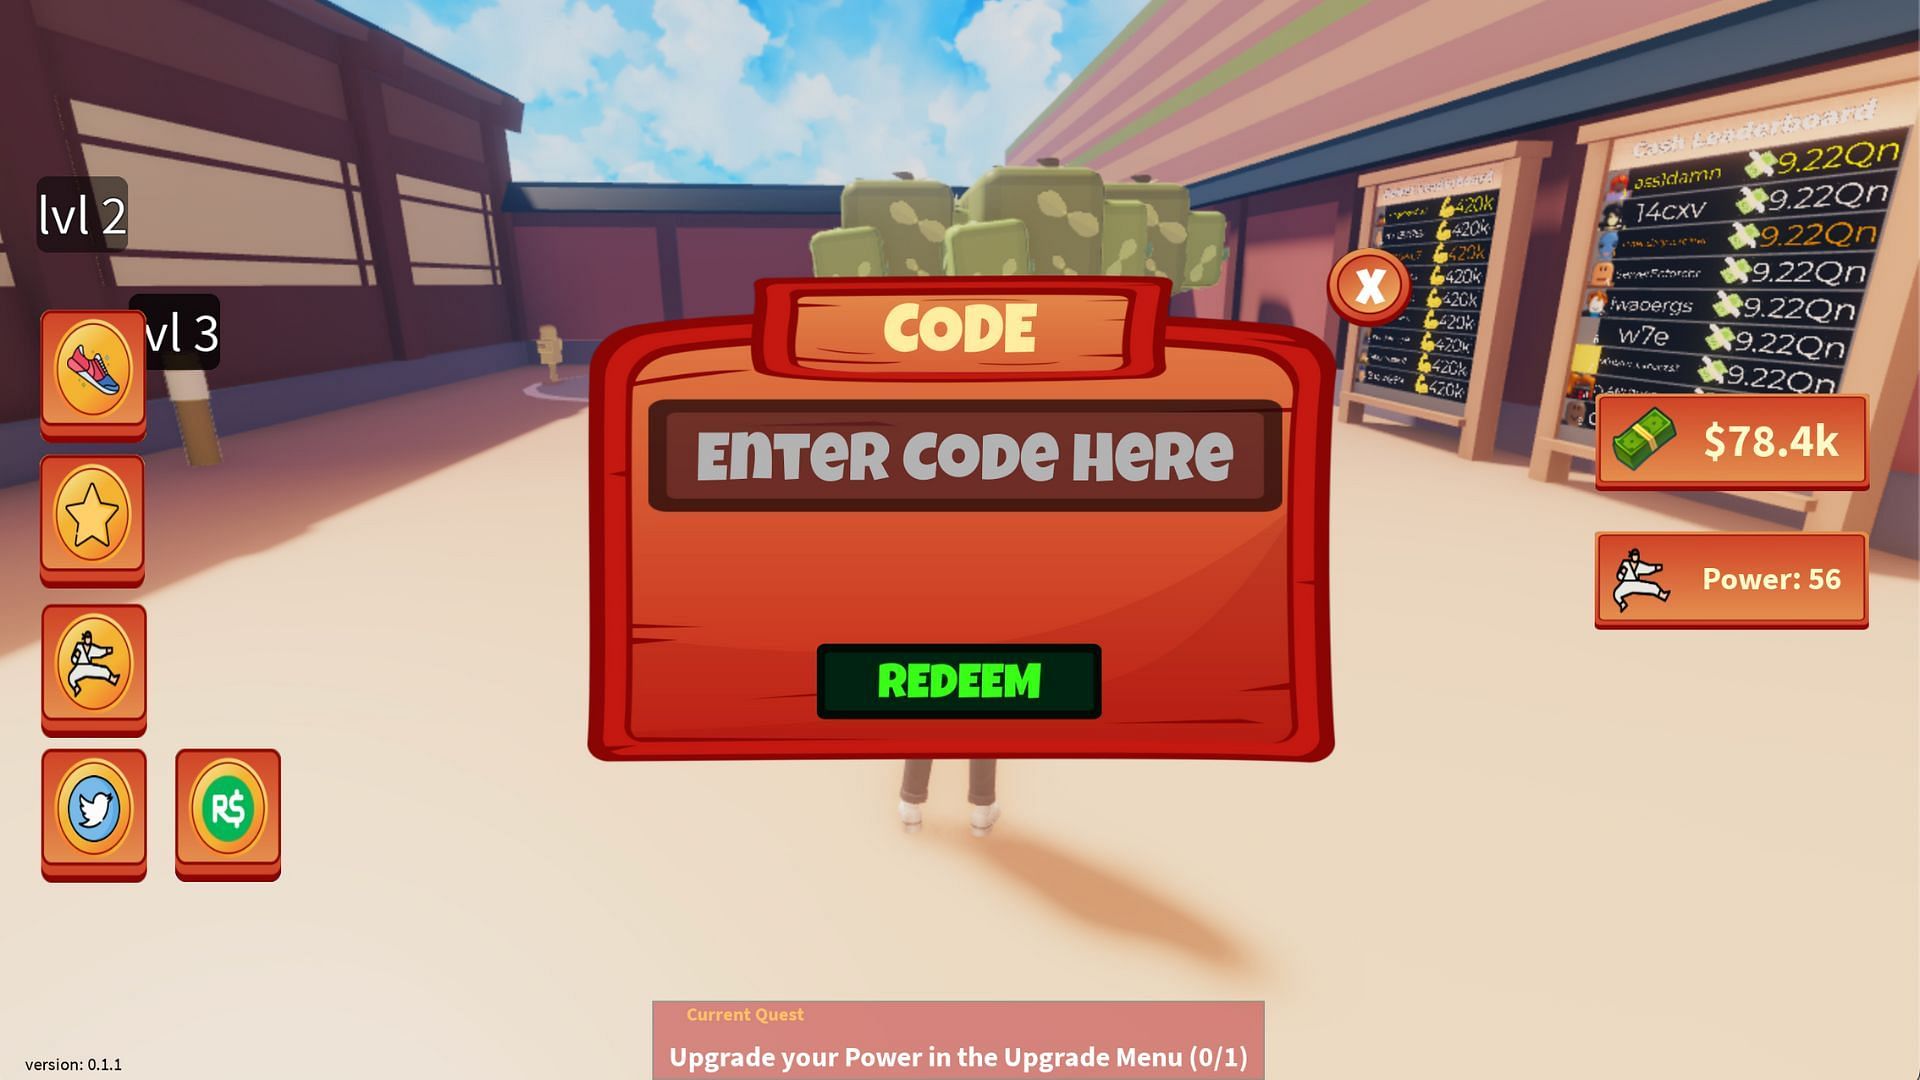 Redeem your code here (Image via Roblox)